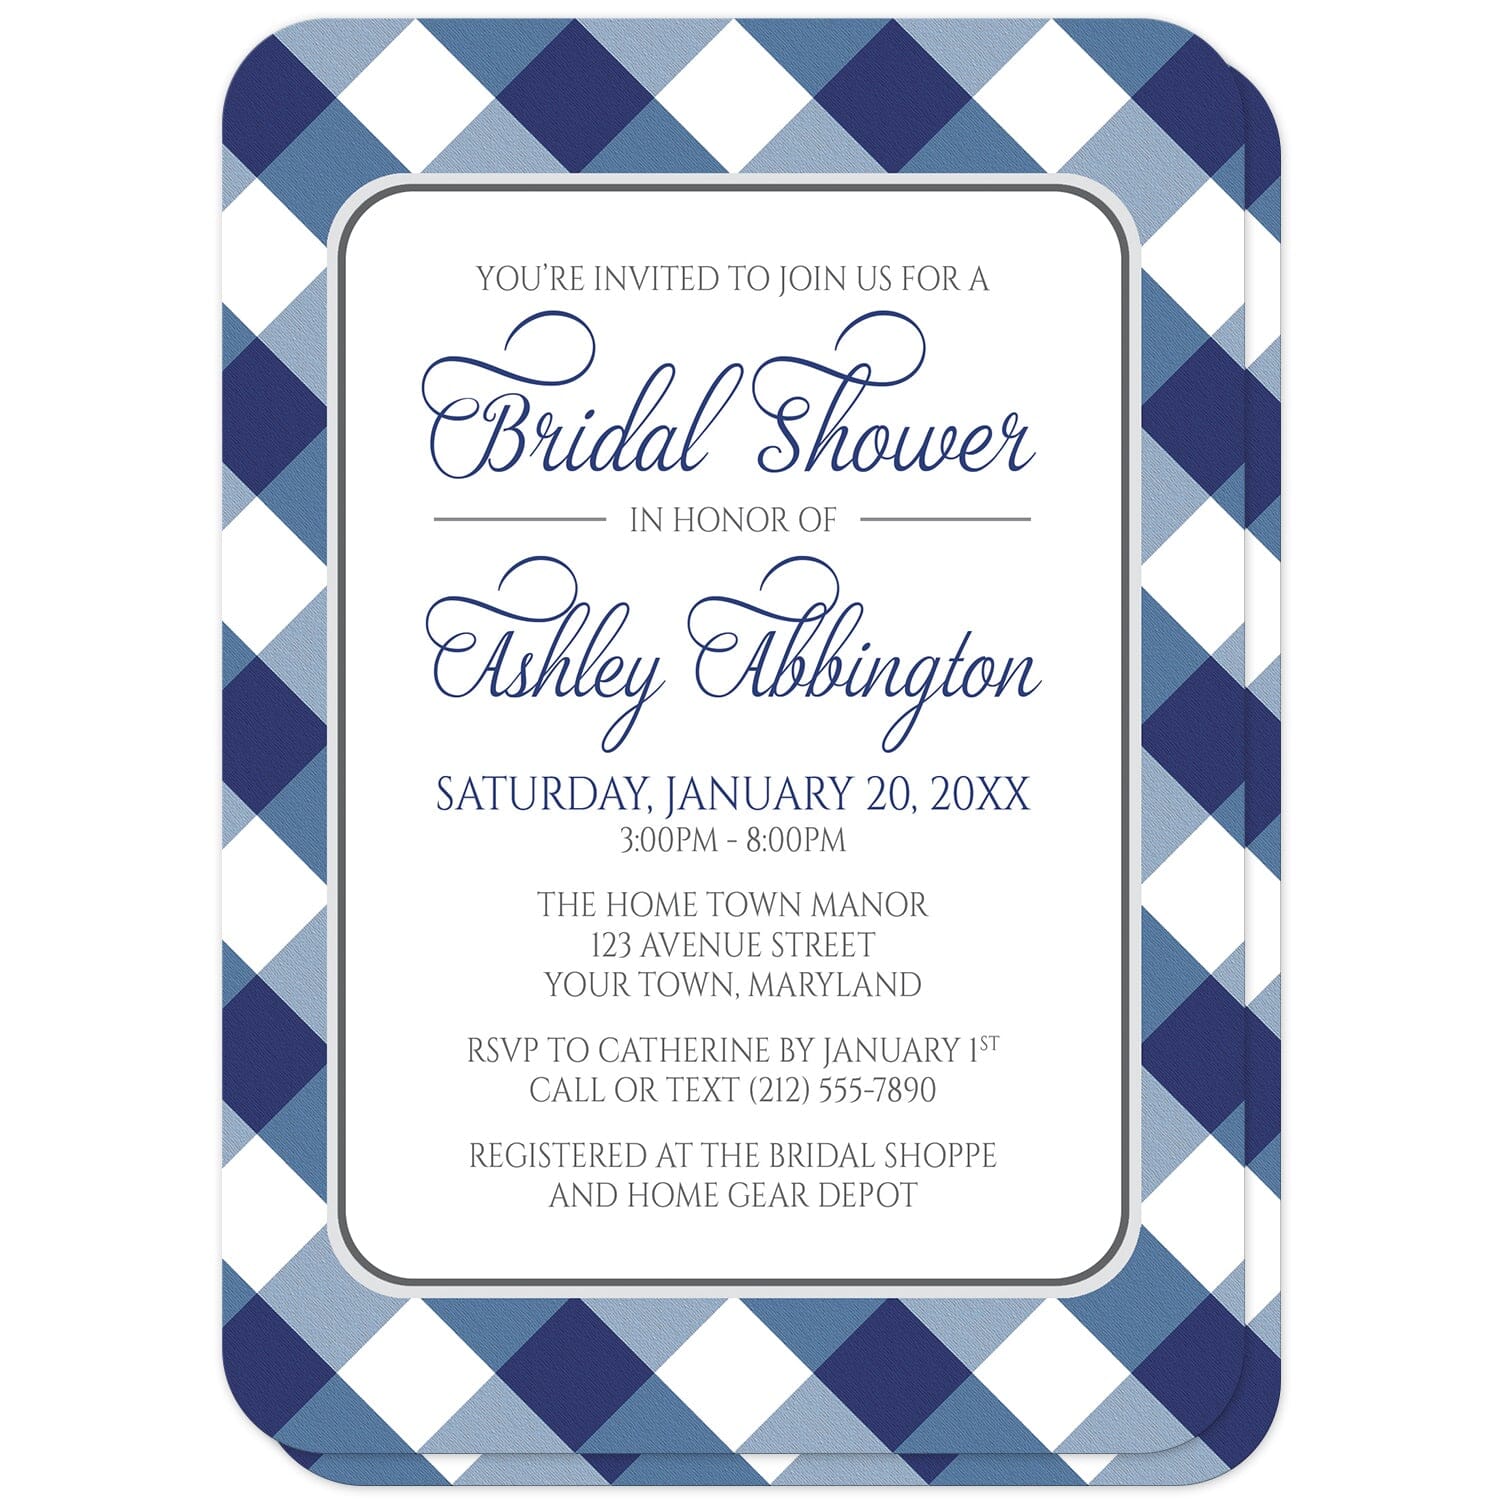 Navy Blue Gingham Bridal Shower Invitations (with rounded corners) at Artistically Invited. Navy blue gingham bridal shower invitations with your personalized bridal shower celebration details custom printed in blue and gray inside a white rectangular area outlined in gray. The background design is a diagonal blue and white gingham pattern which is also printed on the back side of the invitations. 